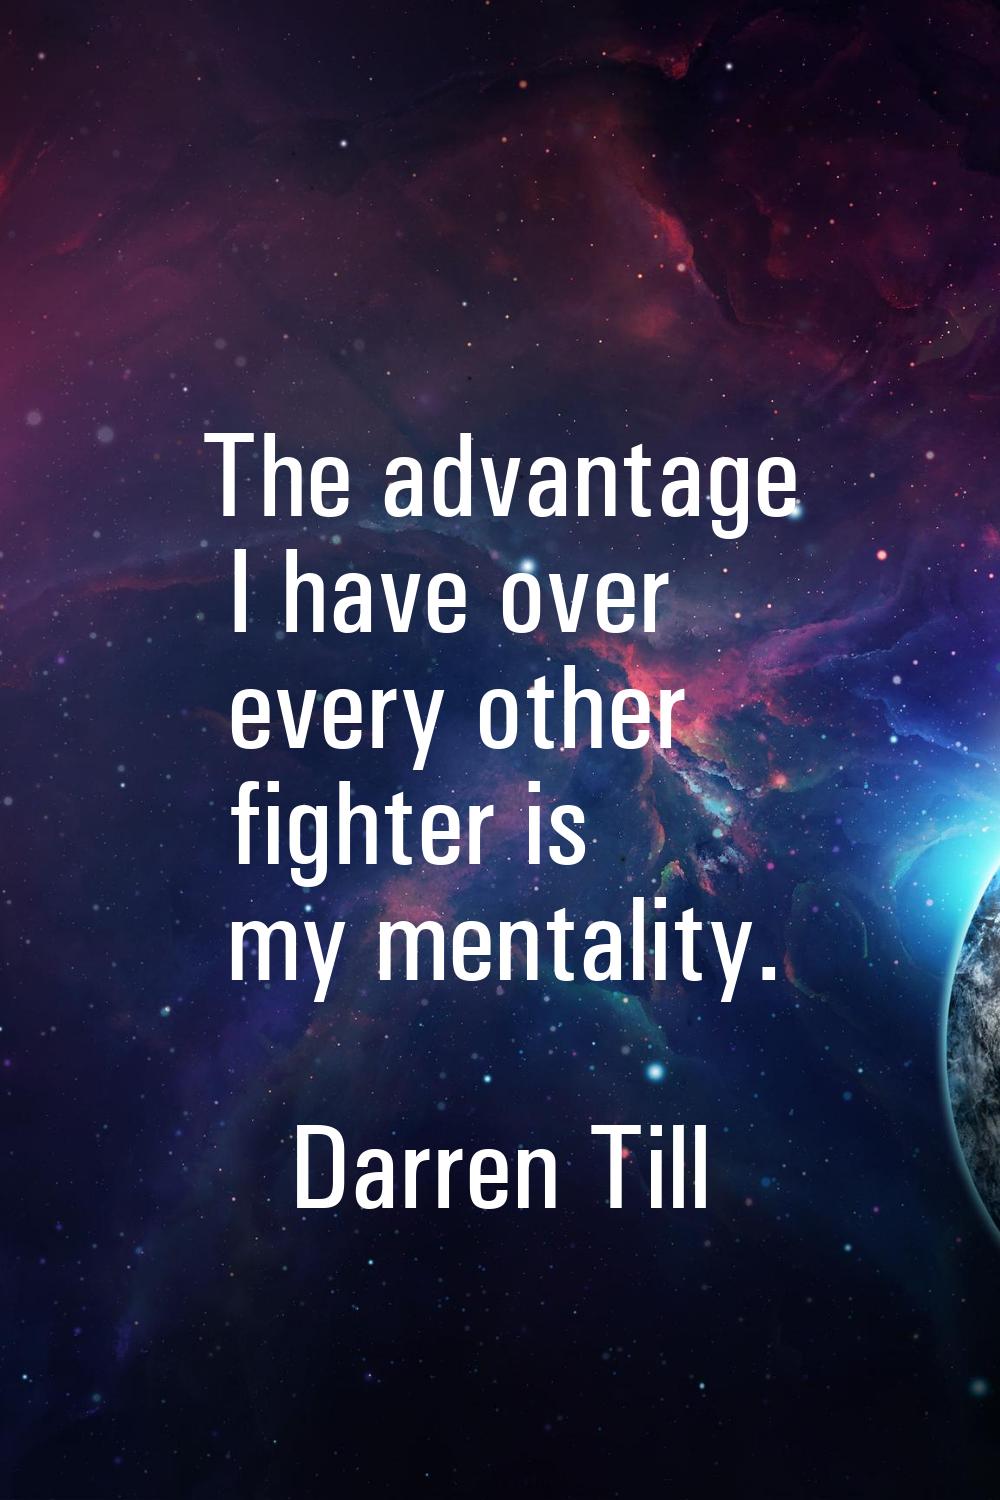 The advantage I have over every other fighter is my mentality.